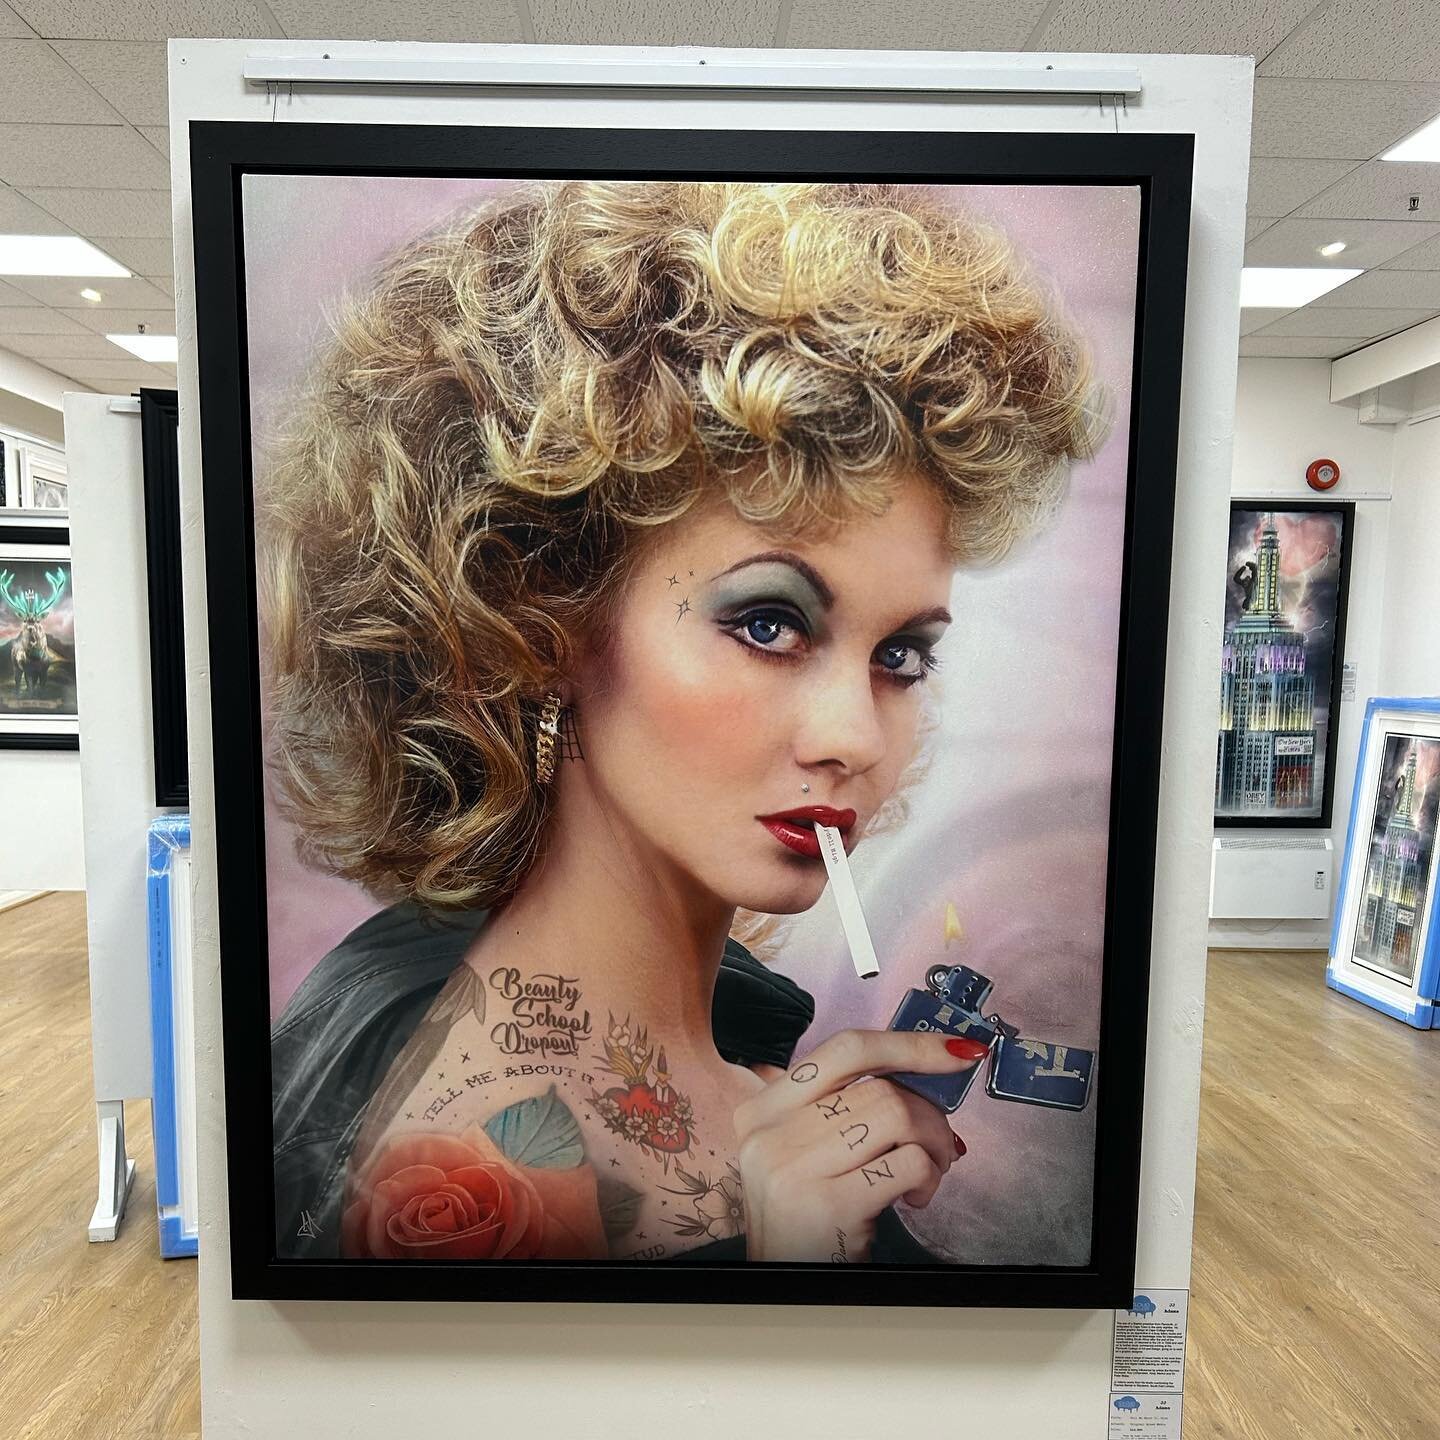 Brand New Limited Edition Collection!! 🤯 My Spring 2023 collection is now available in a gallery near you! Contact your local gallery/stockist to find out about availability. #art #artist #artwork #popart #exhibition #limitededition #designer #artex